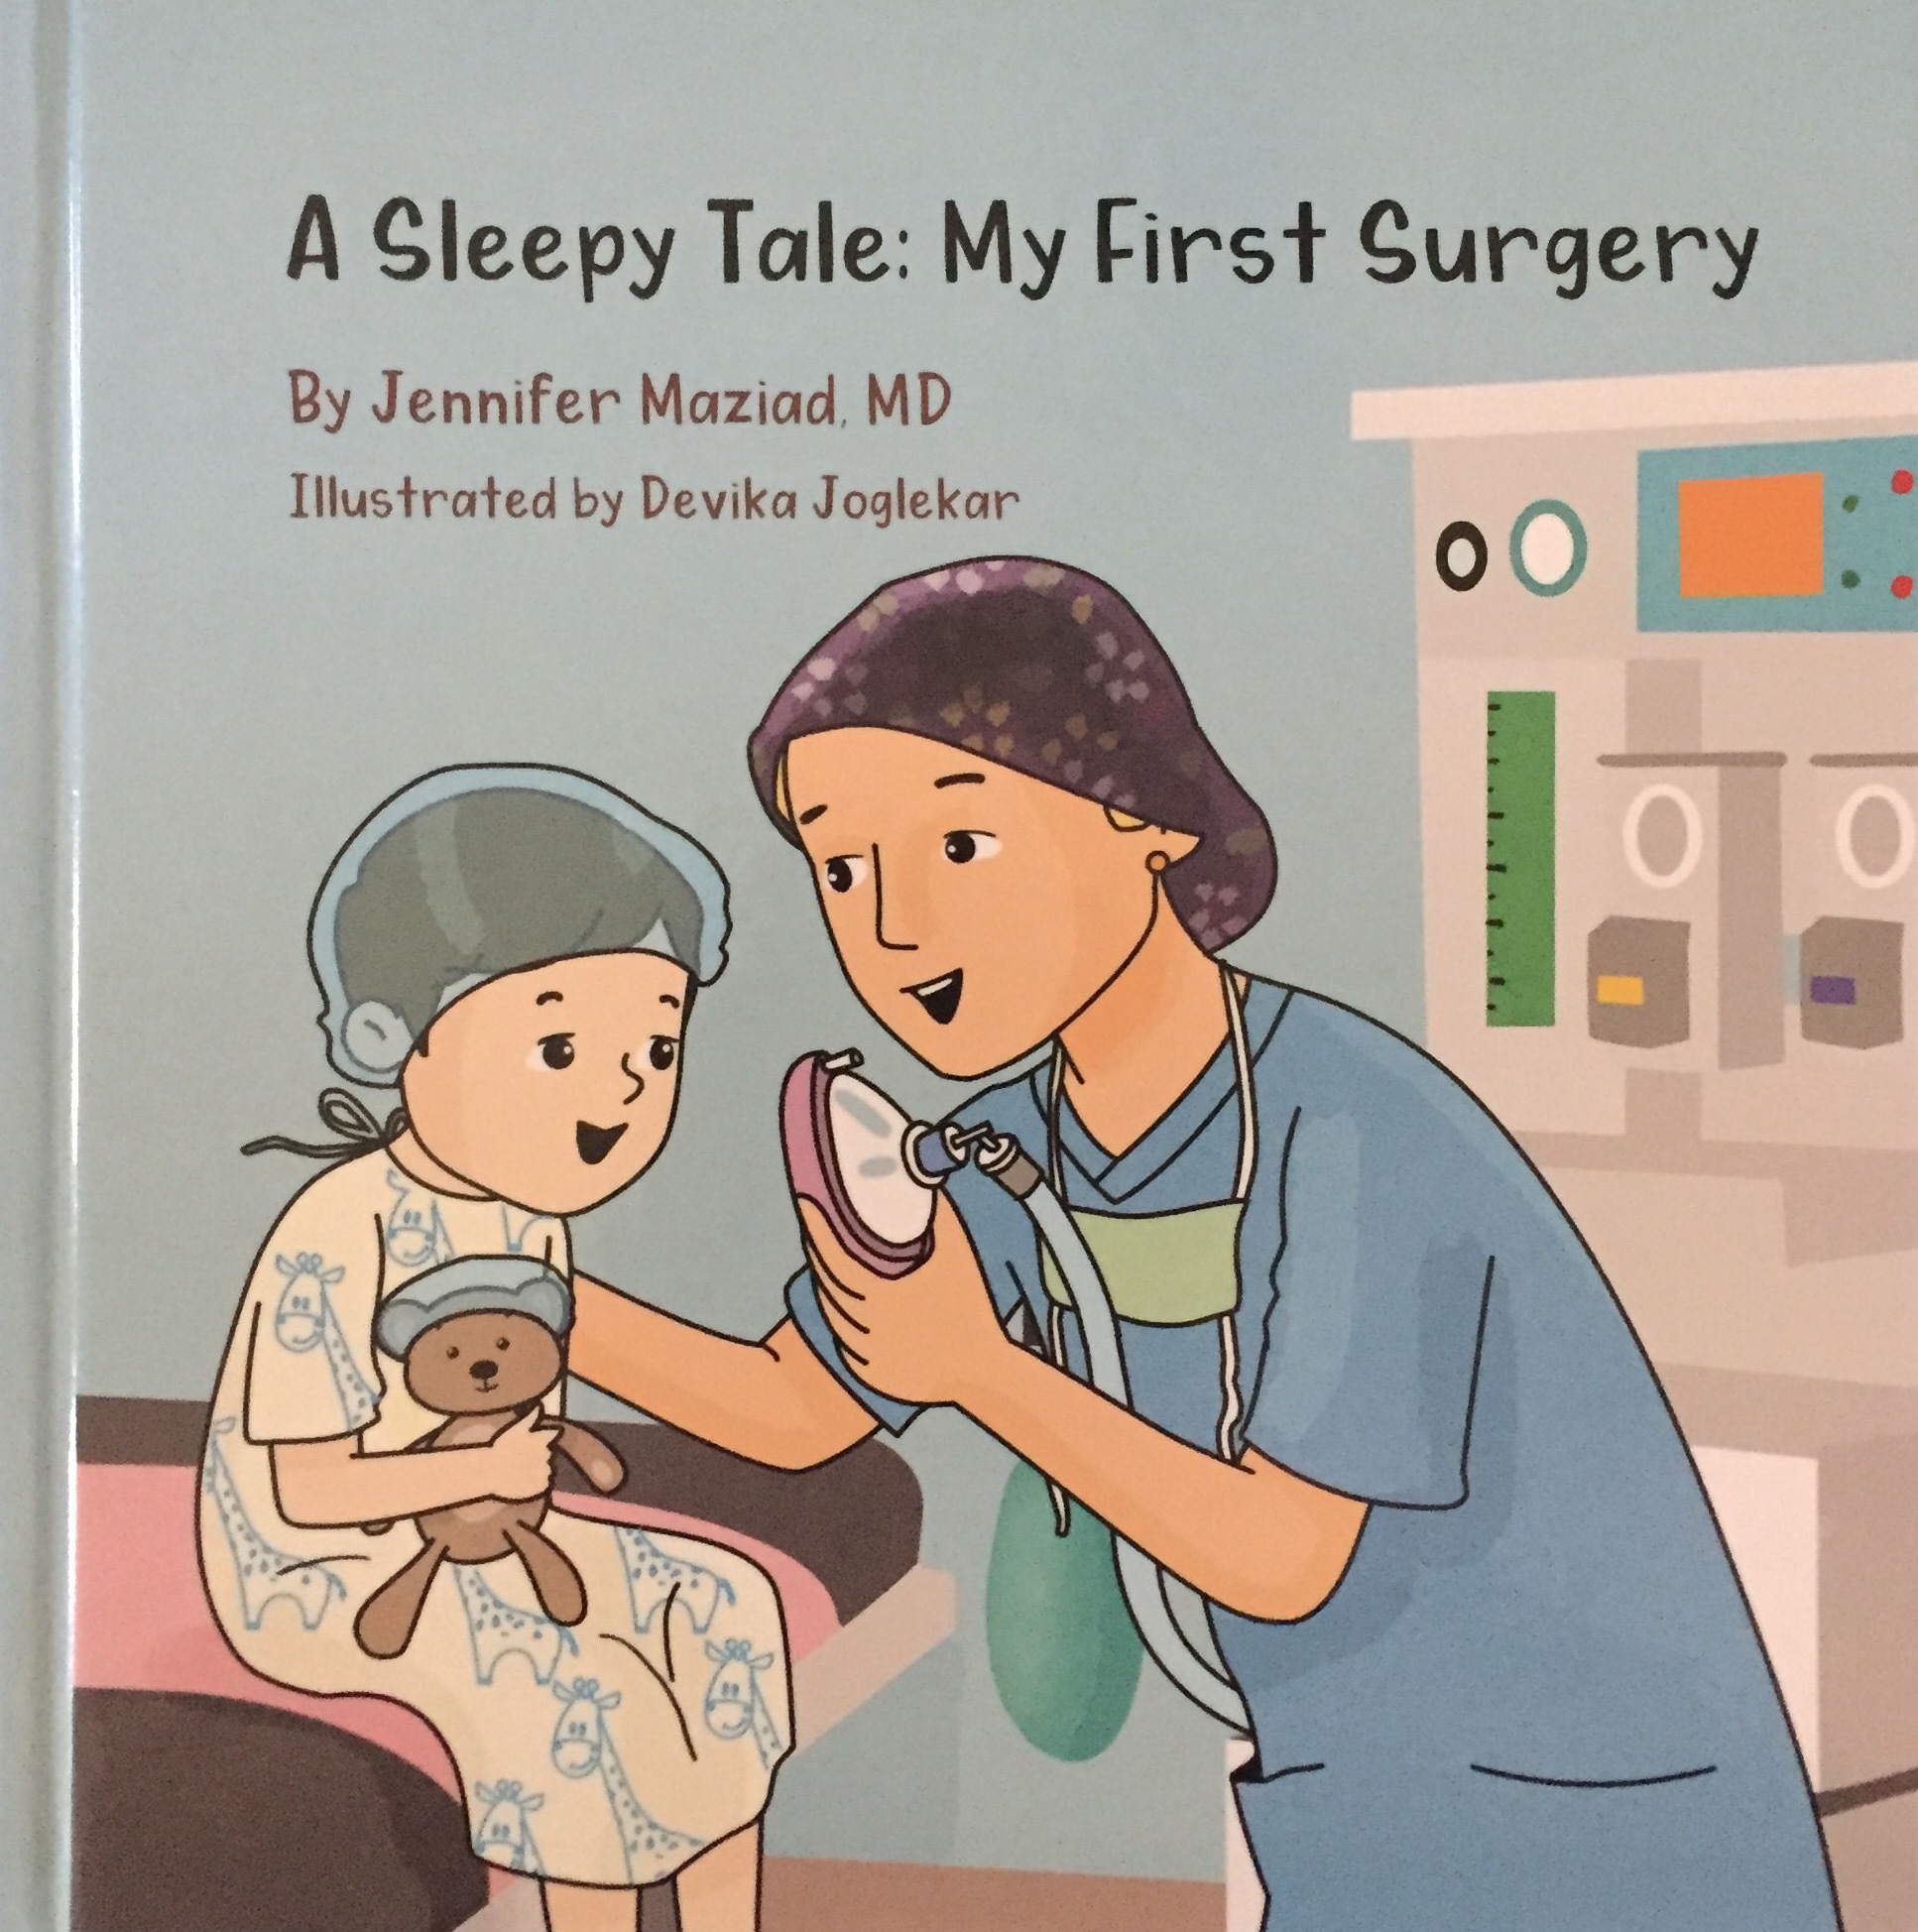 “A Sleepy Tale: My First Surgery” is meant to help children prepare for their first surgery experiences.